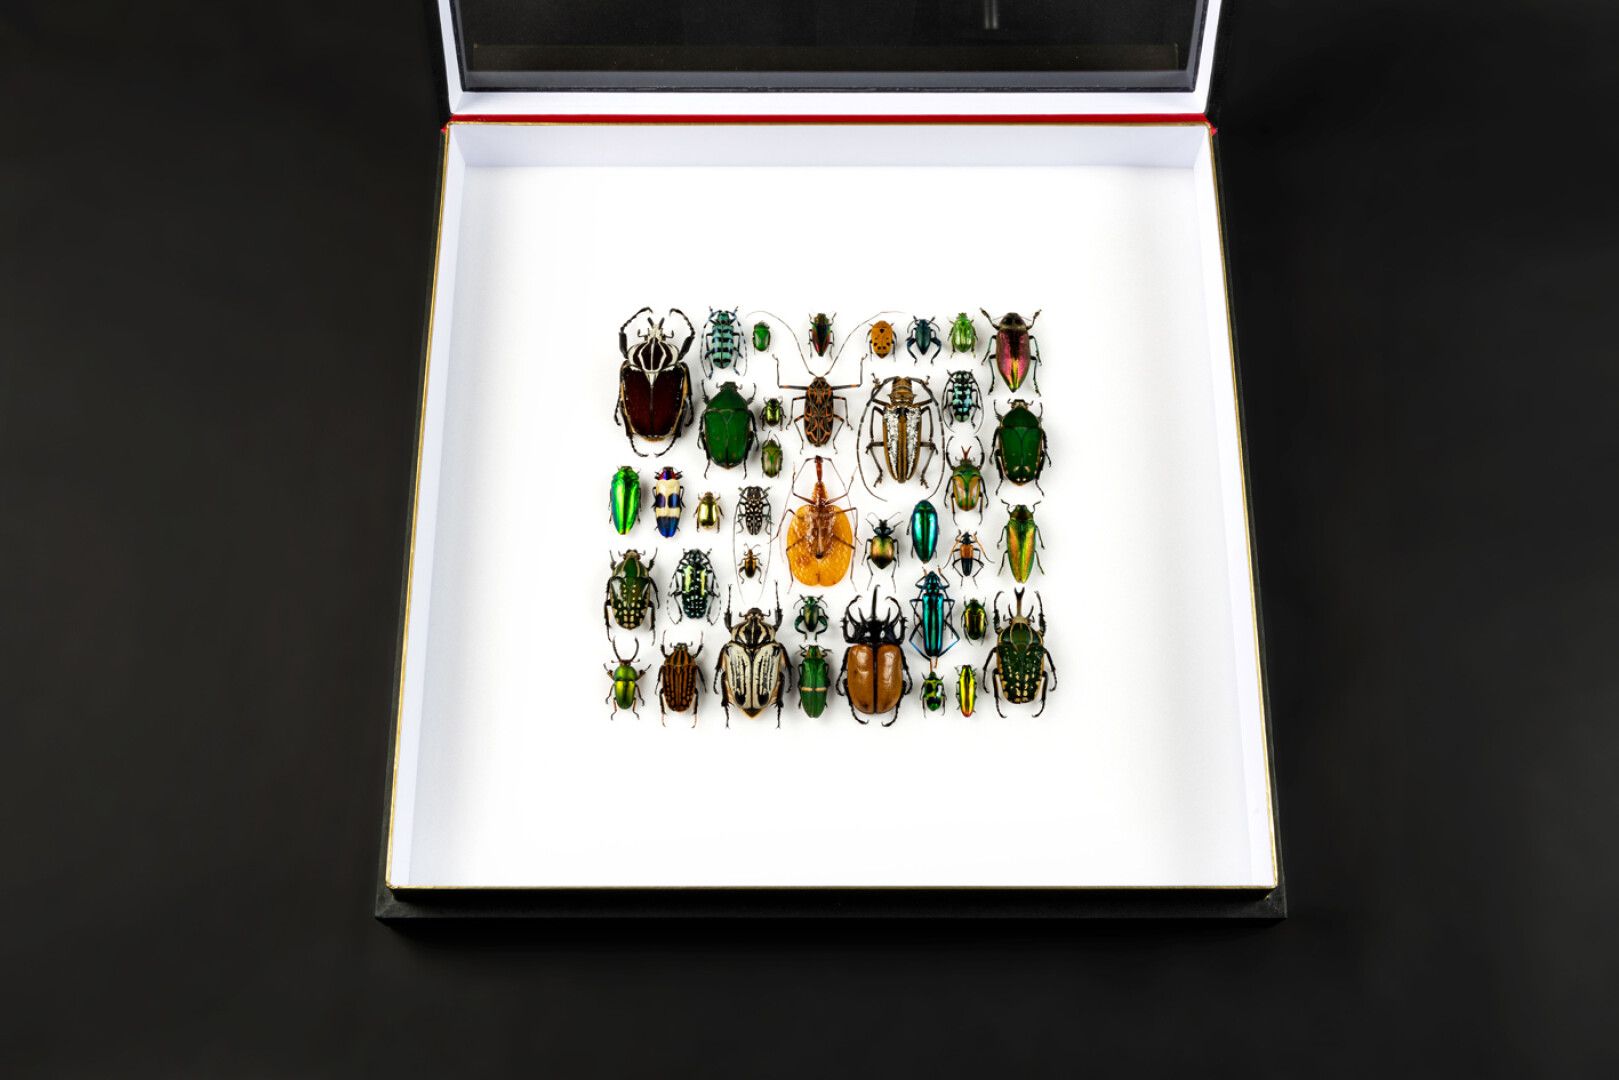 Null Modern presentation of a set of large beetles

Each insect is carefully sel&hellip;